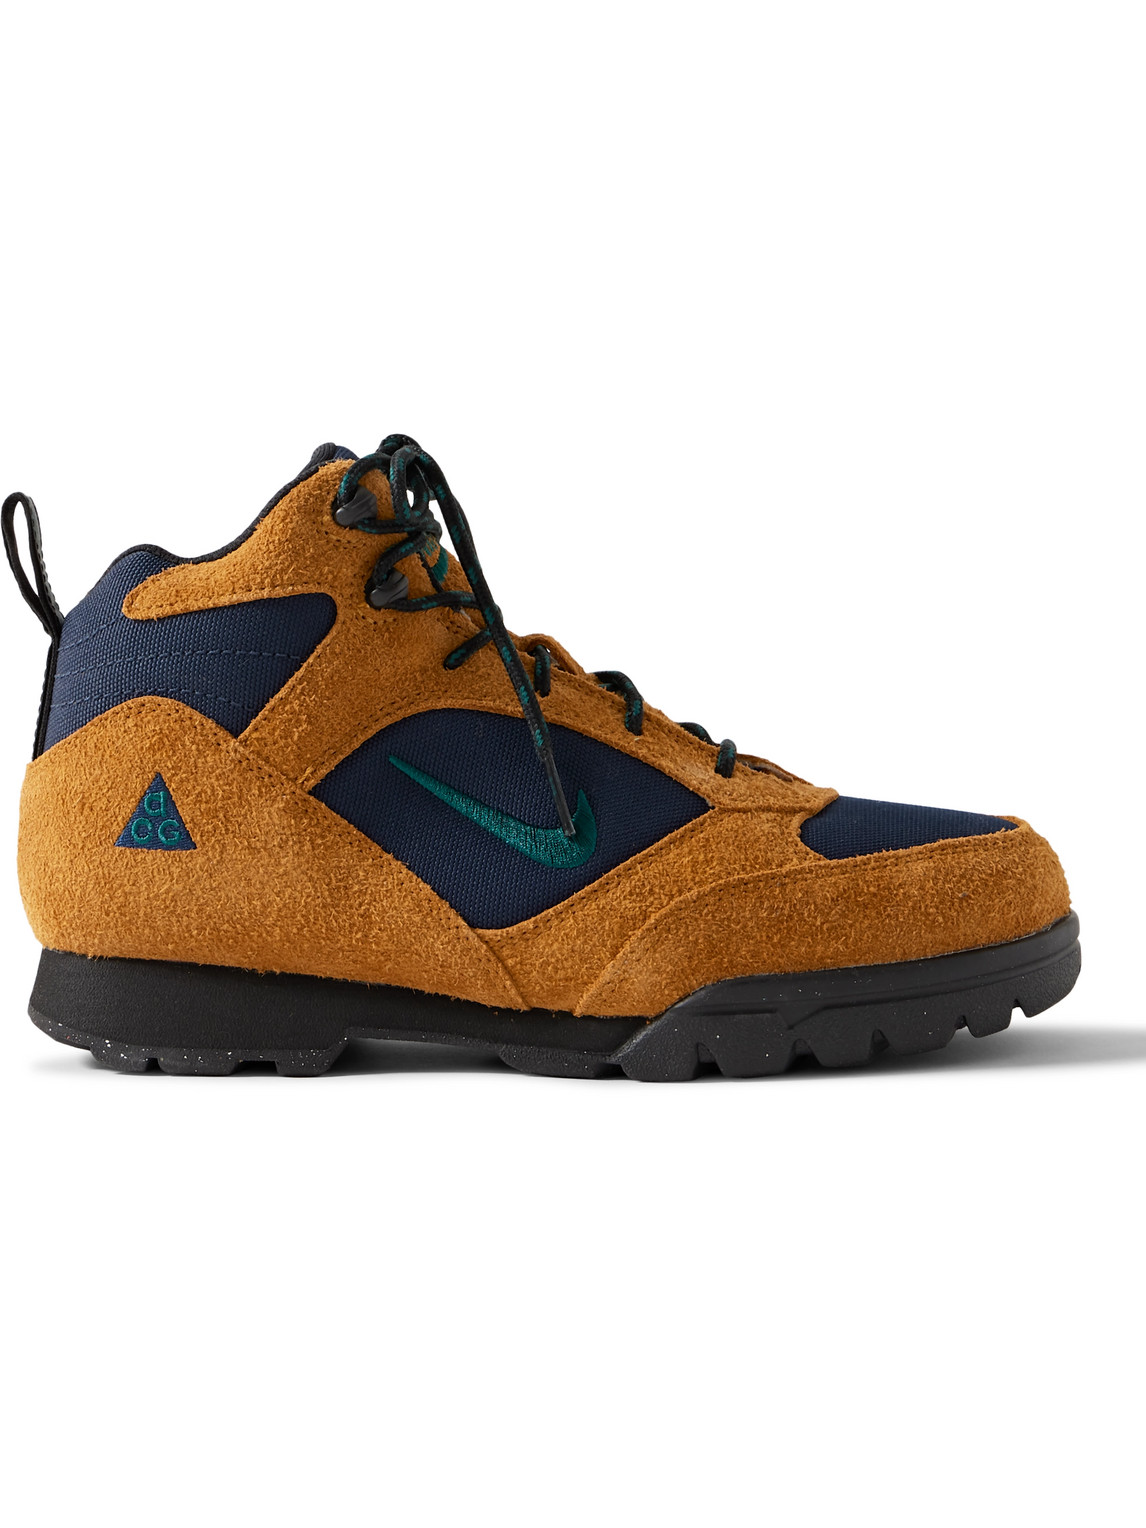 NIKE ACG TORRE MID CANVAS AND SUEDE HIKING BOOTS